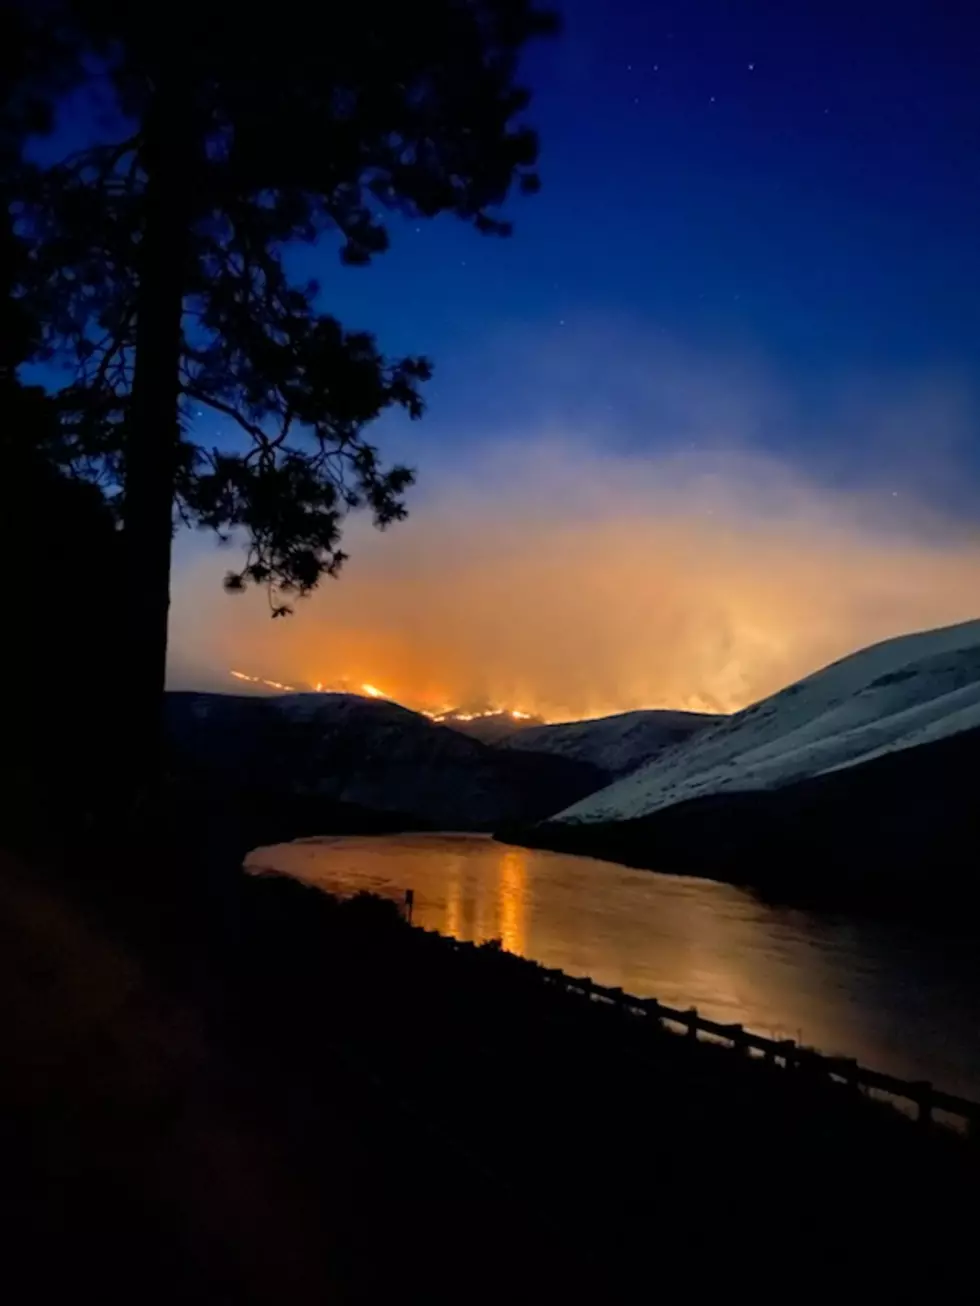 Evans Canyon Wildfire Has Torched 69,920 Acres, Winds Increasing